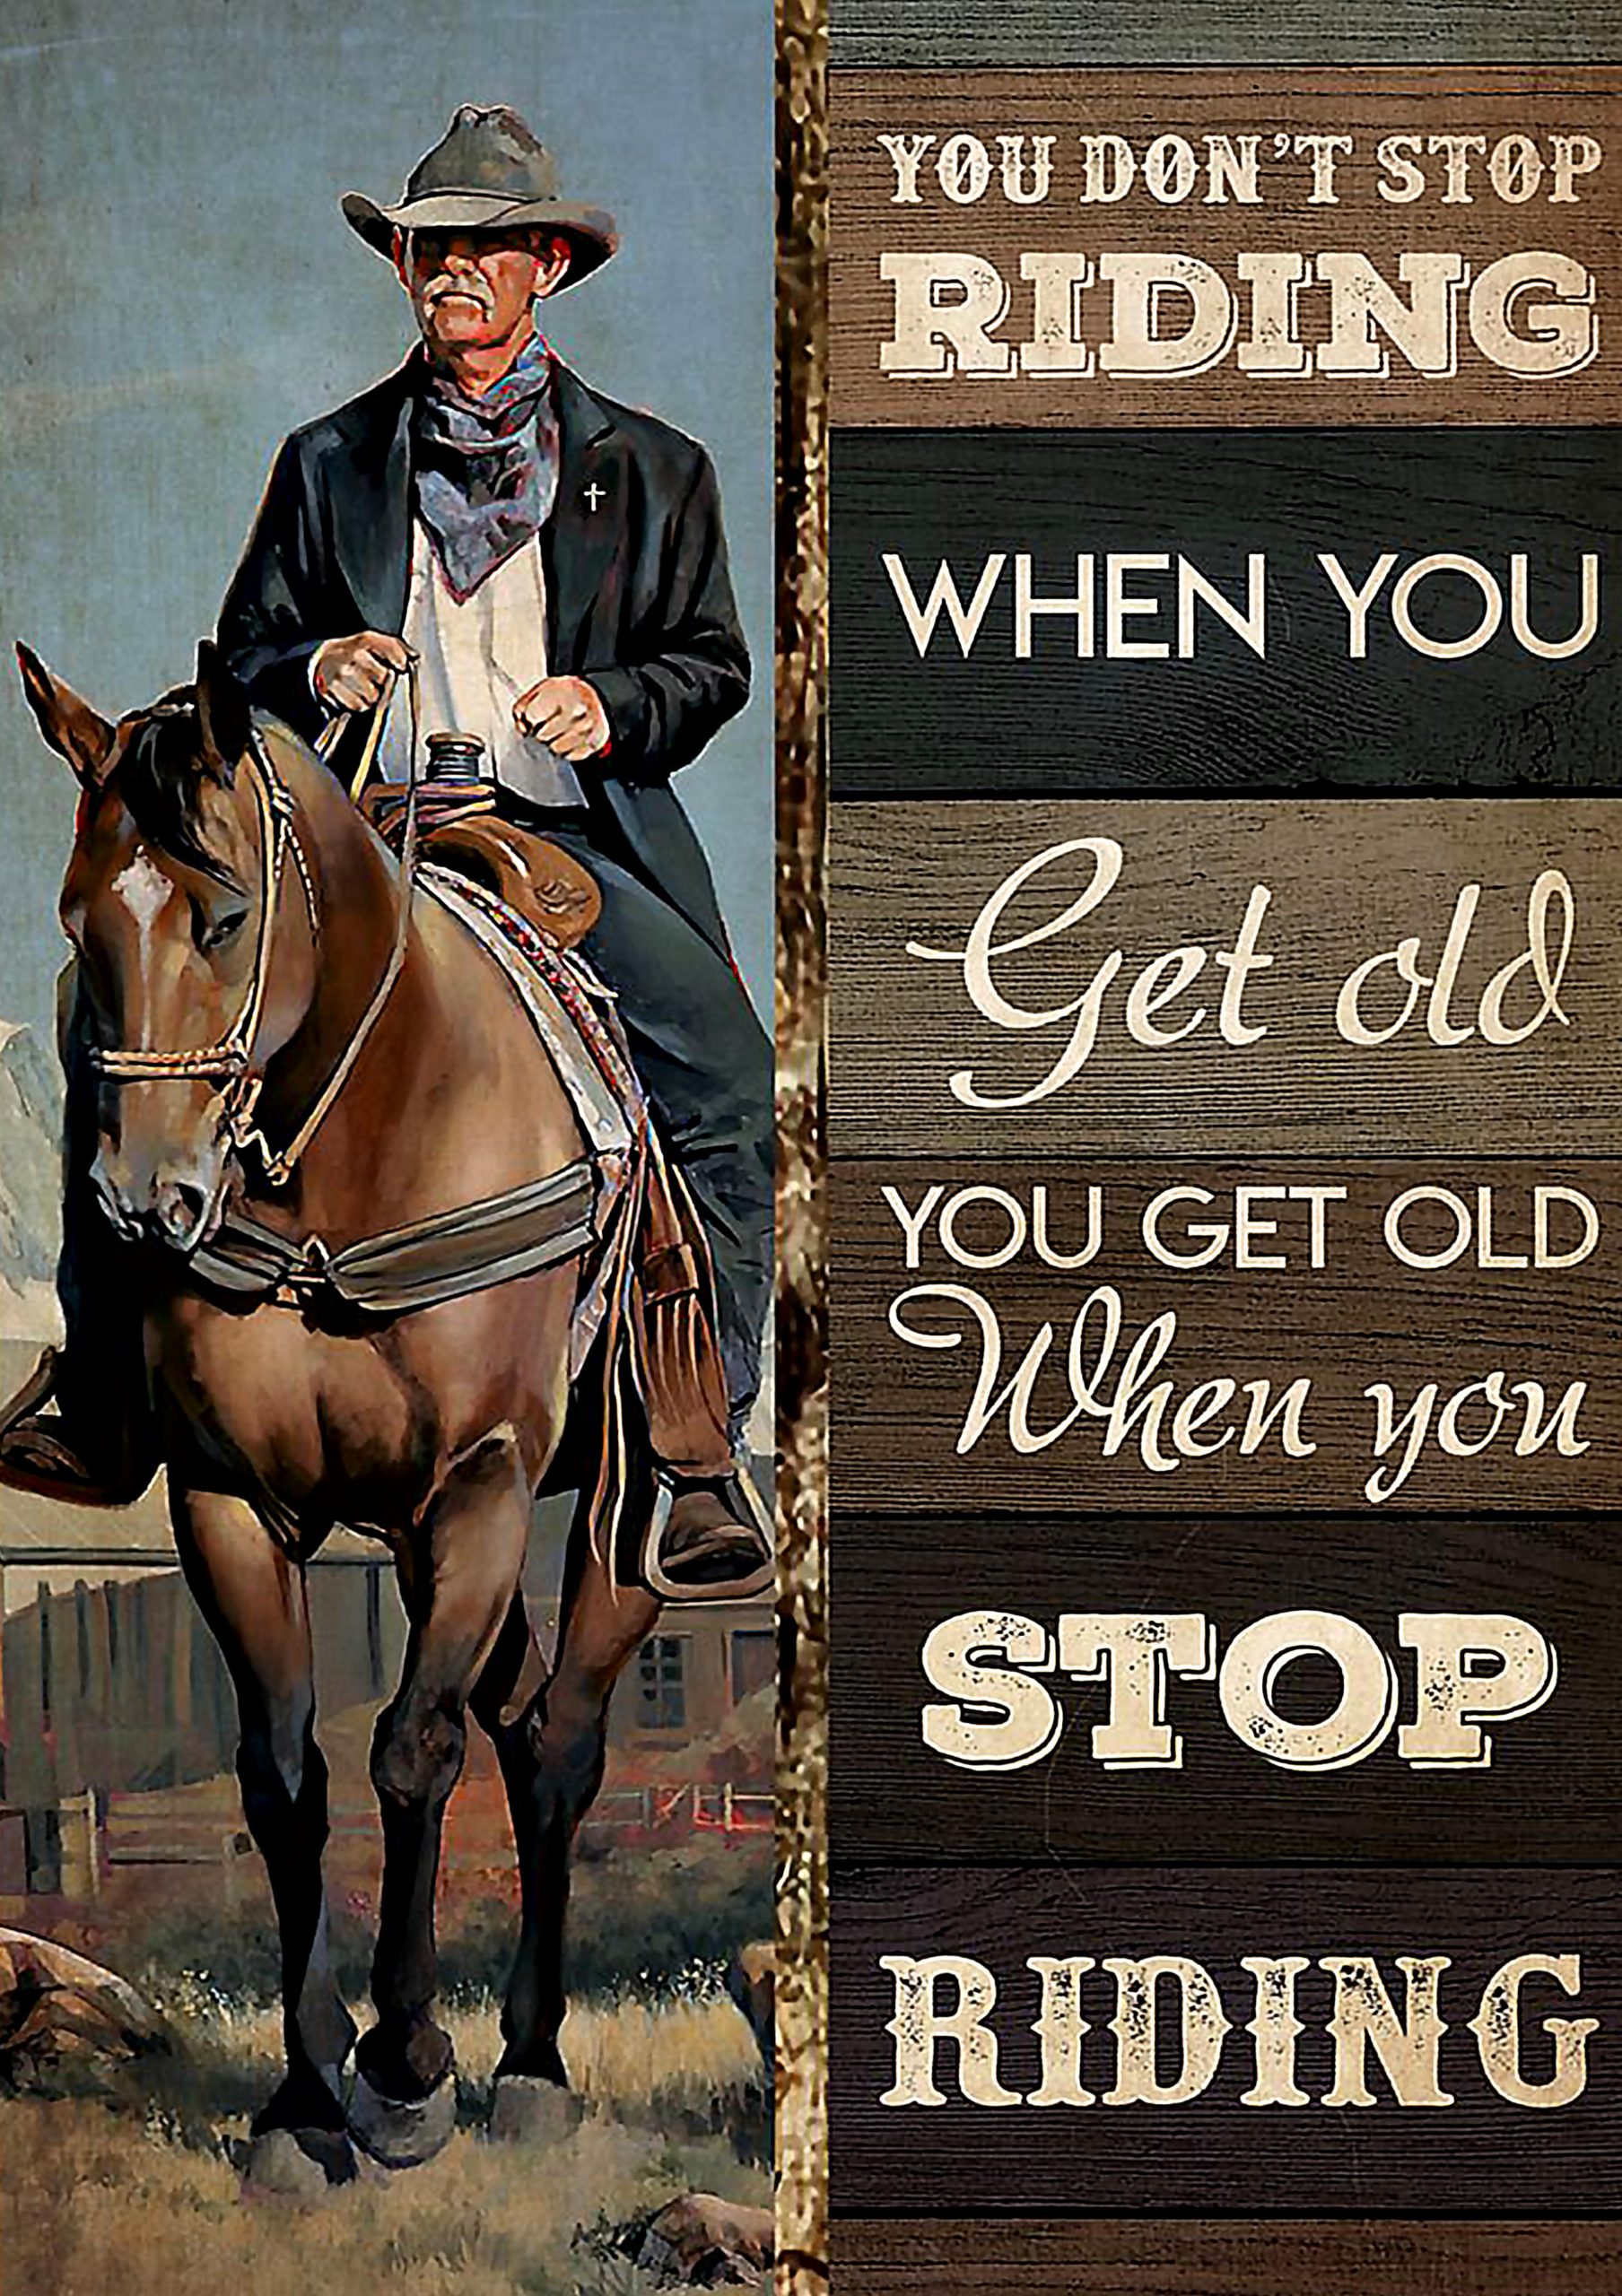 vintage old cowboy you dont stop riding when you get old poster 1 - Copy (3)